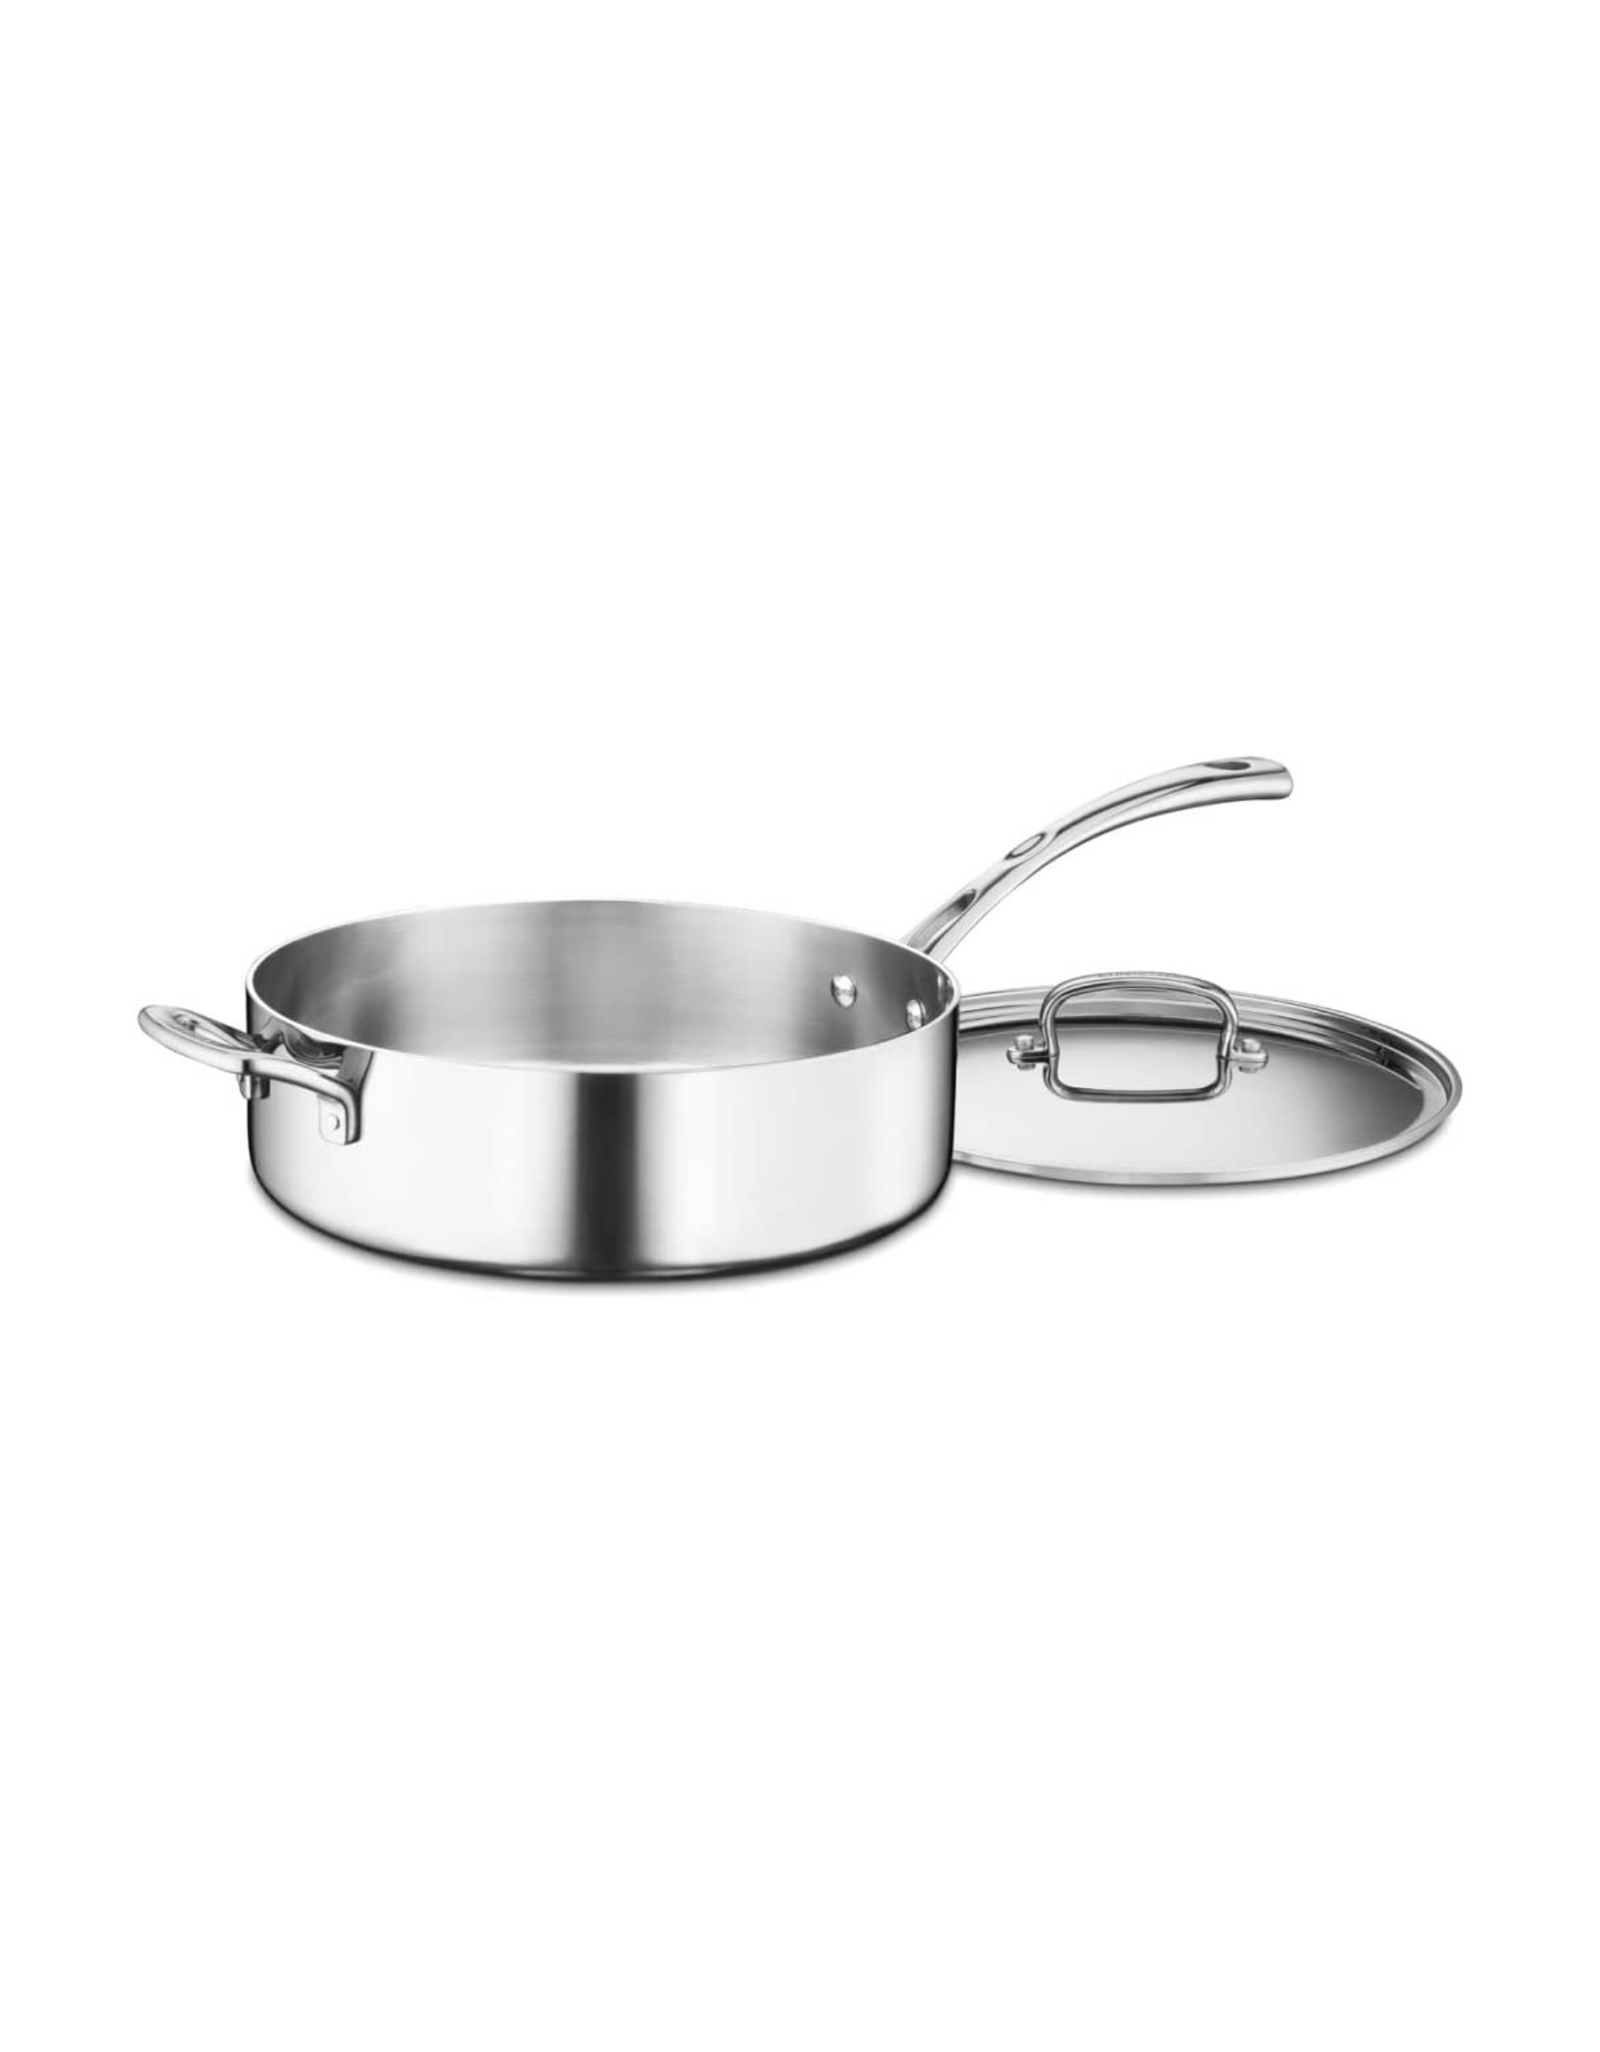 Cuisinart FCT33-28H French Classic Tri-Ply Stainless Saute Pan with Cover and Handle, 5-1/2 Qt